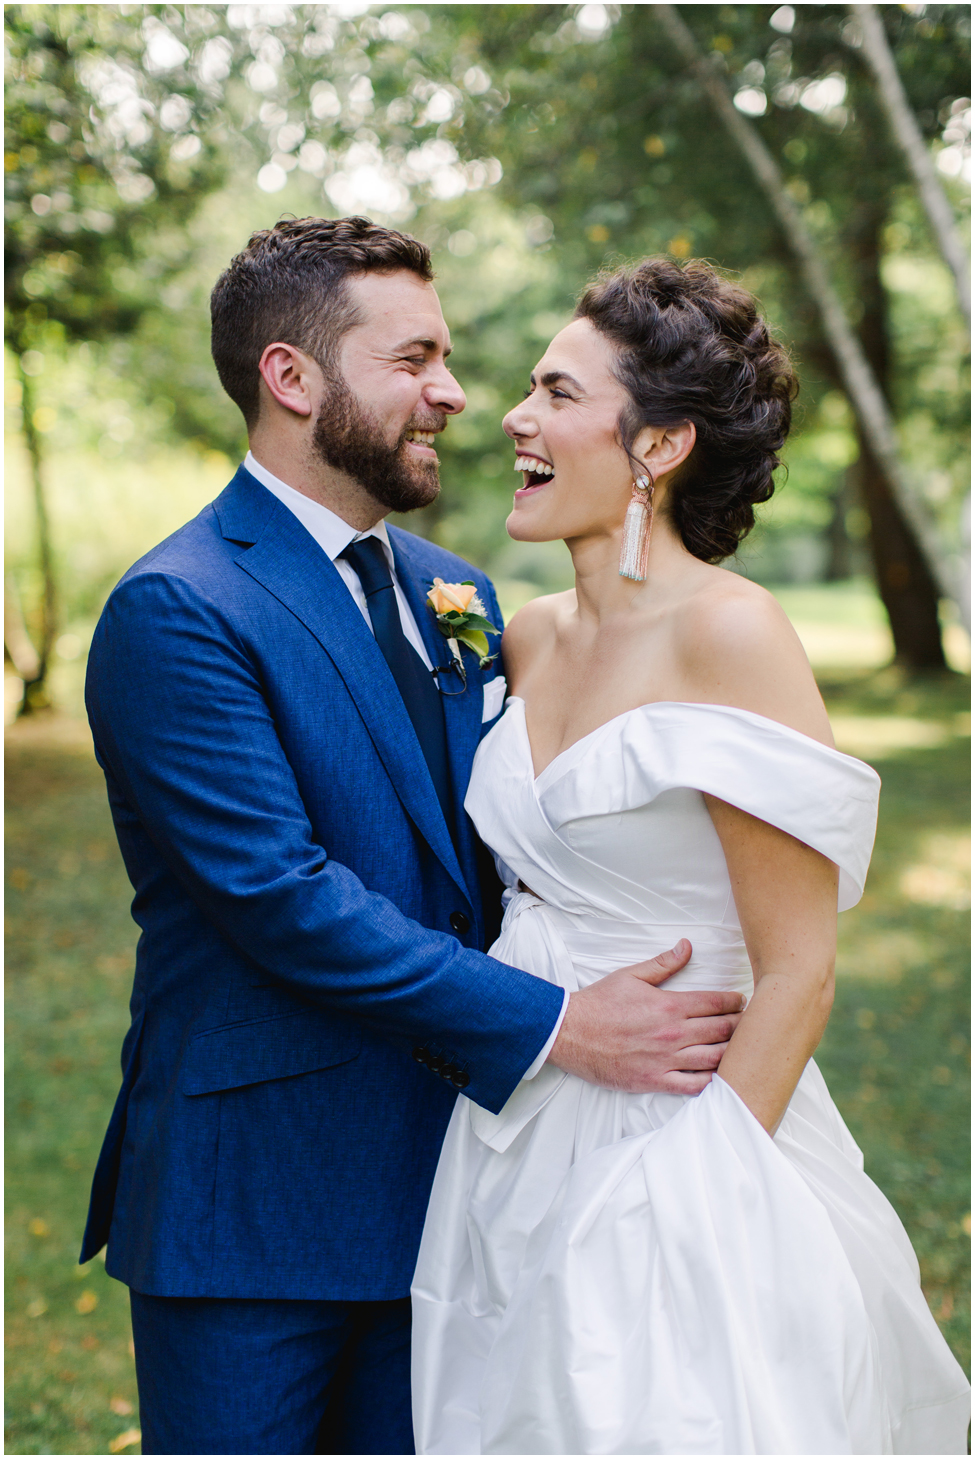 Bride and groom portraits at Knox Farms in New York